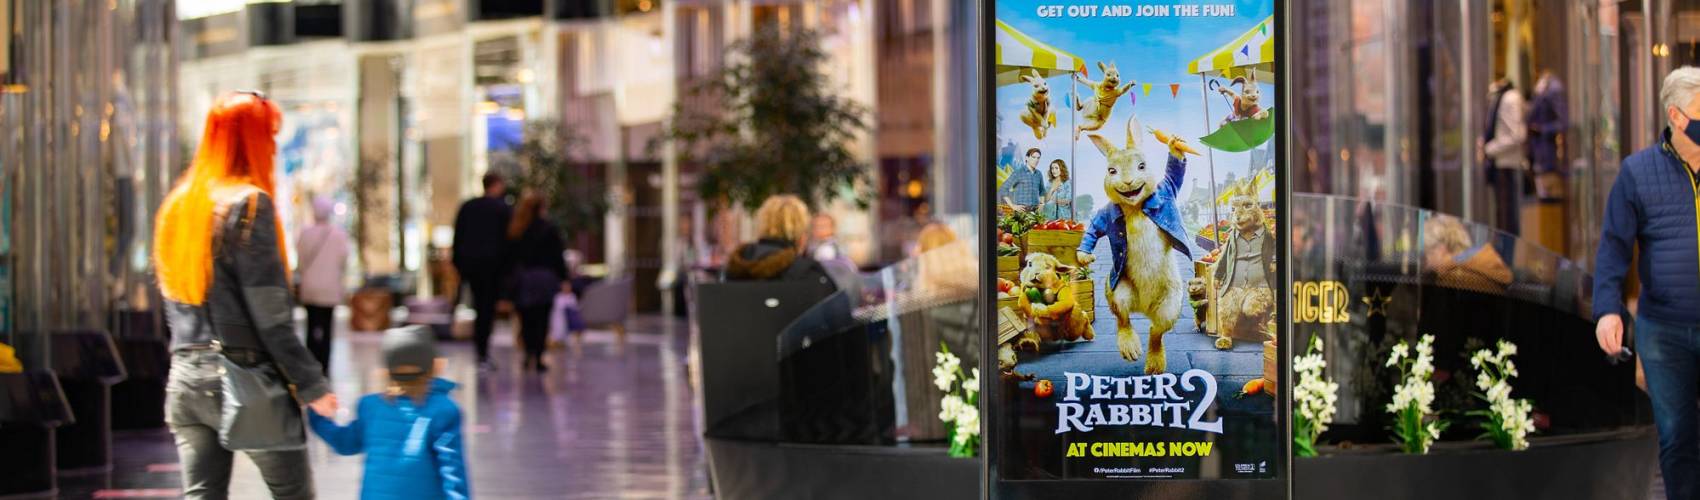 Digital screen in a busy shopping mall showing Peter Rabbit 2 ad